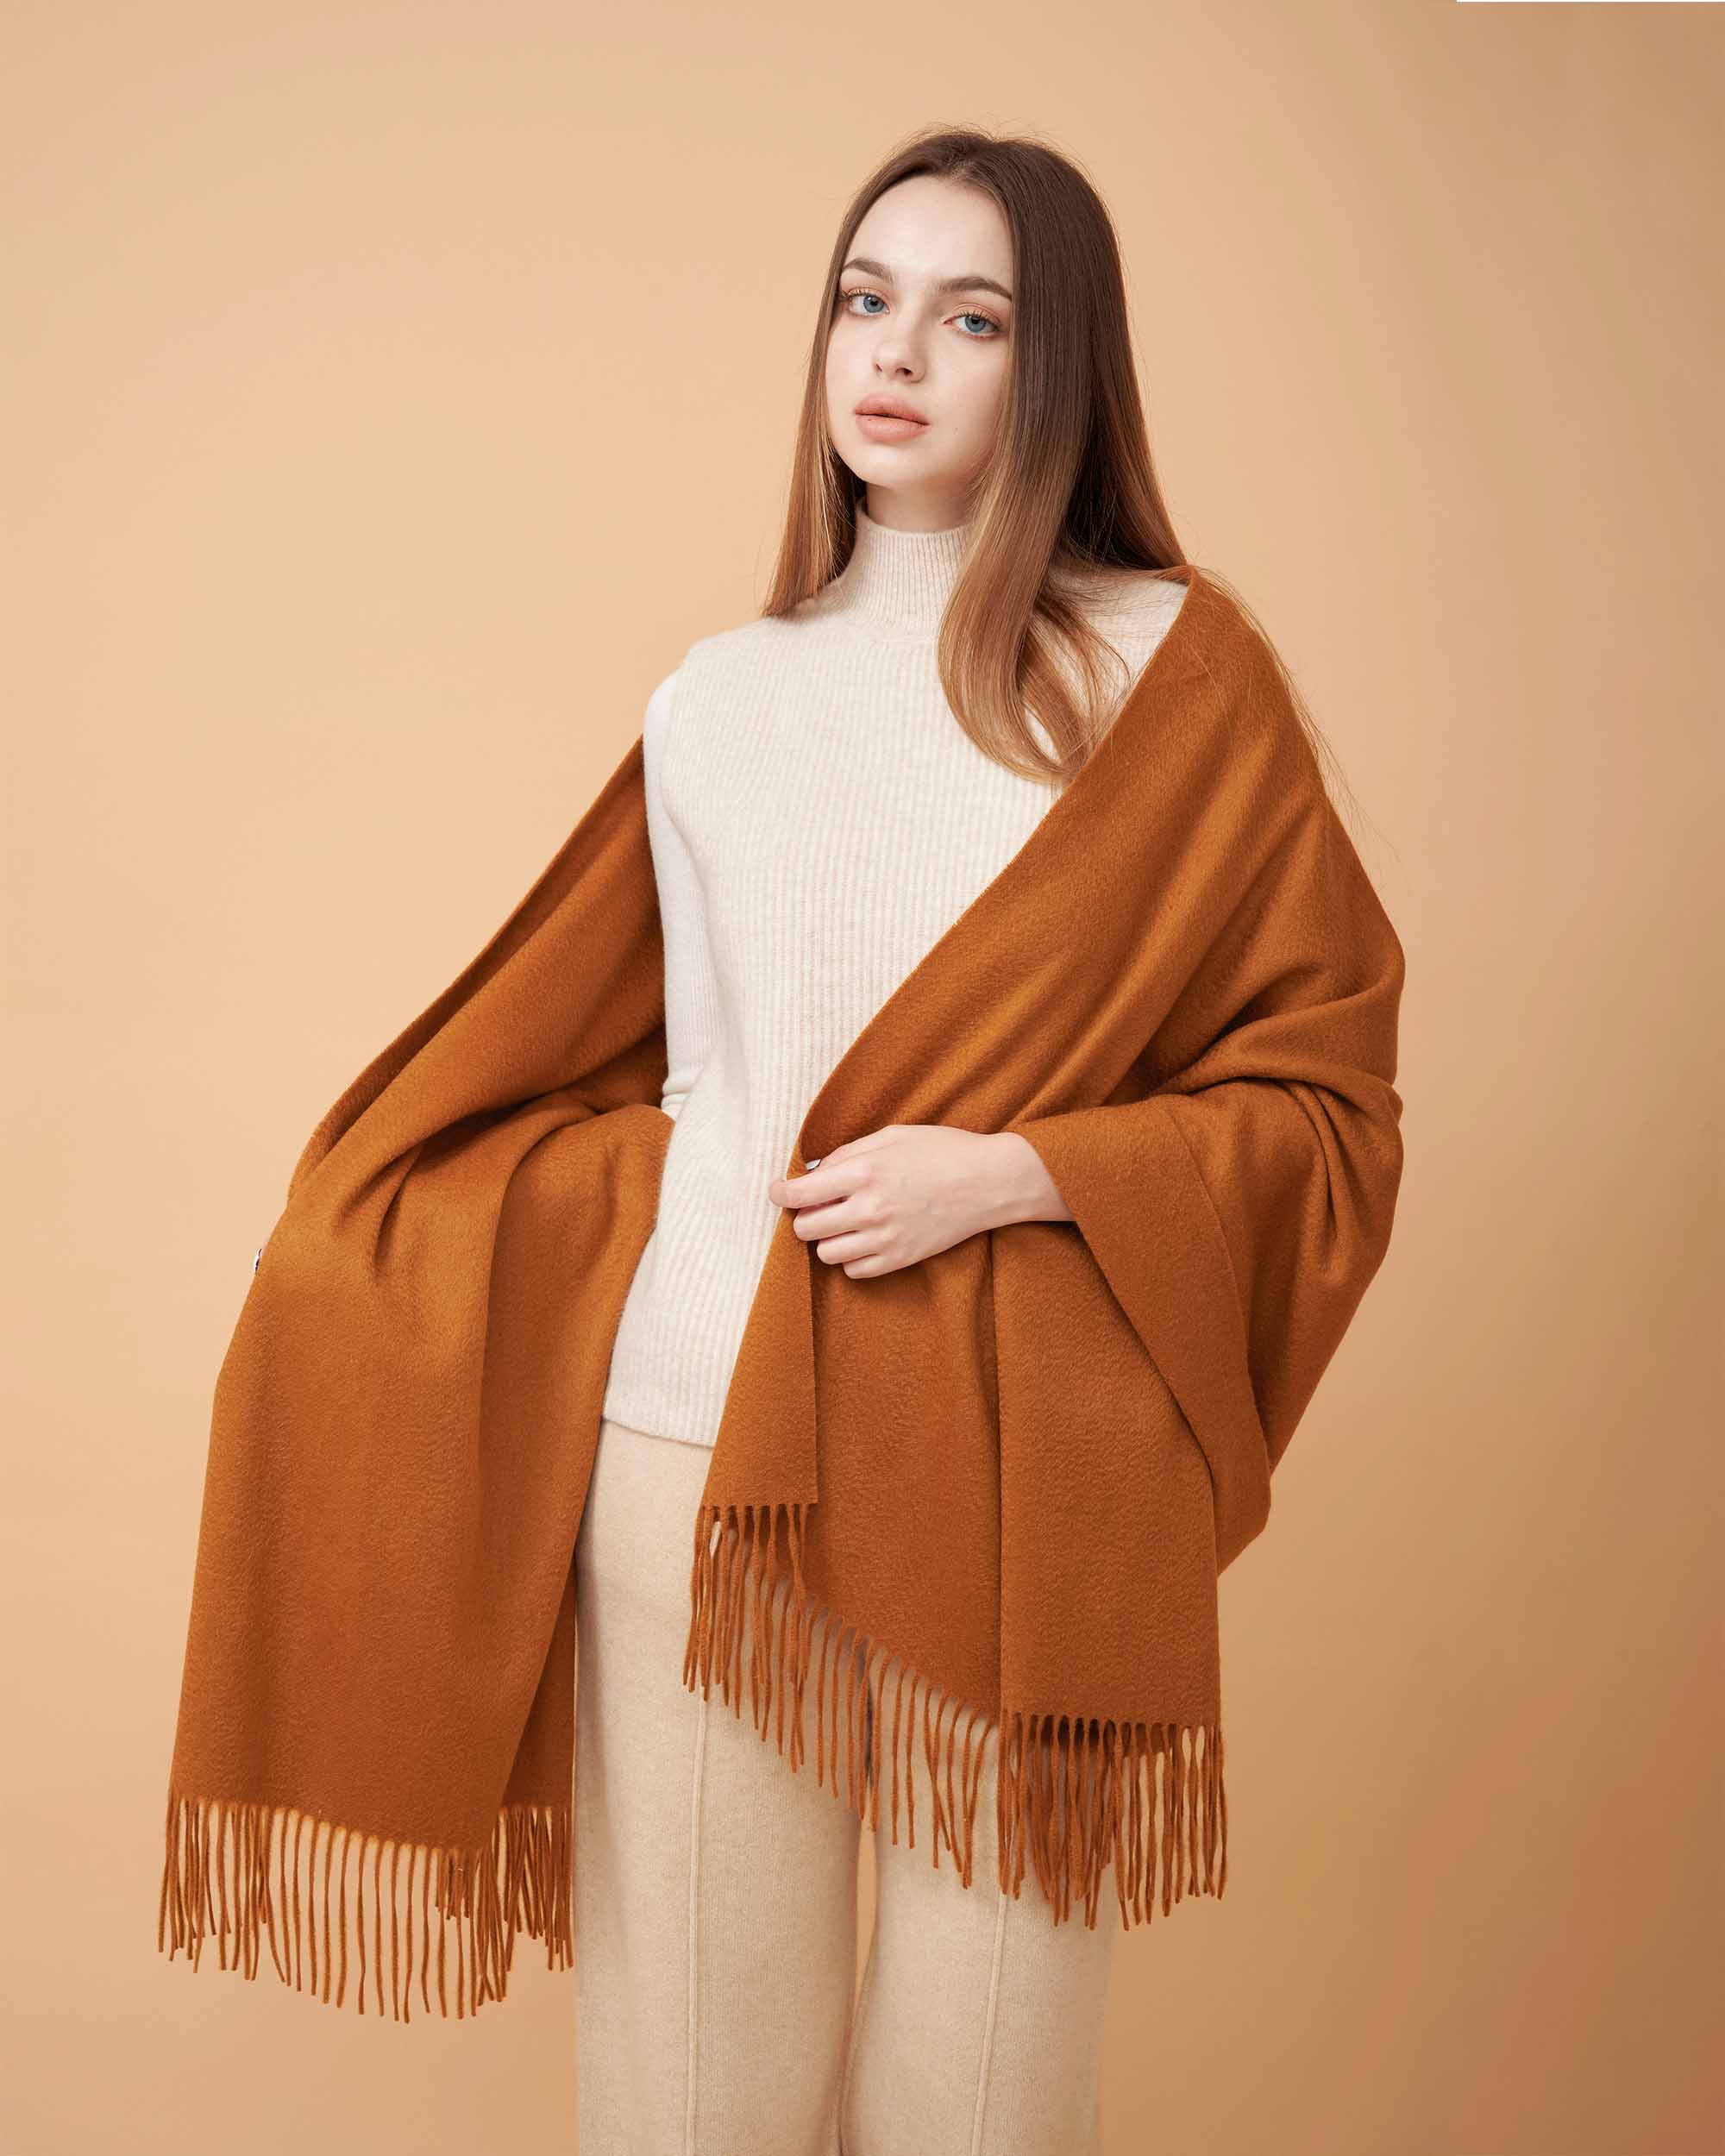 Cashmere Scarf , High Quality Scarf , Cashmere Sienna Brown scarf , 100% Cashmere Scarf , Scarf For All Seasons , Made By Davinii , front Image with posing